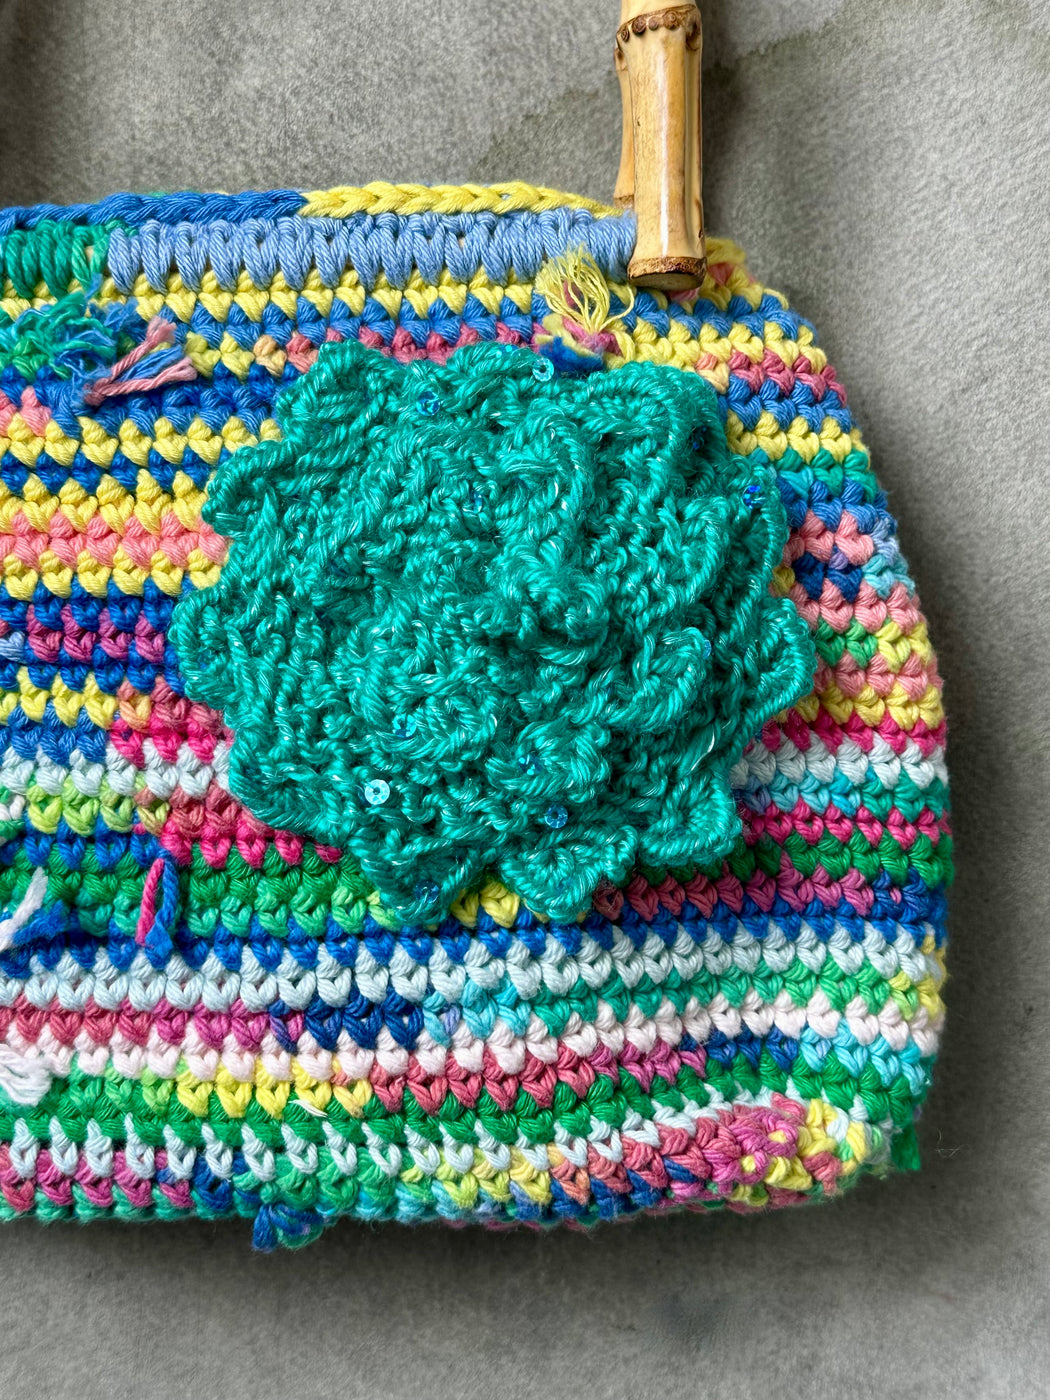 "Hey There" Hand-Crocheted Purse by Albo